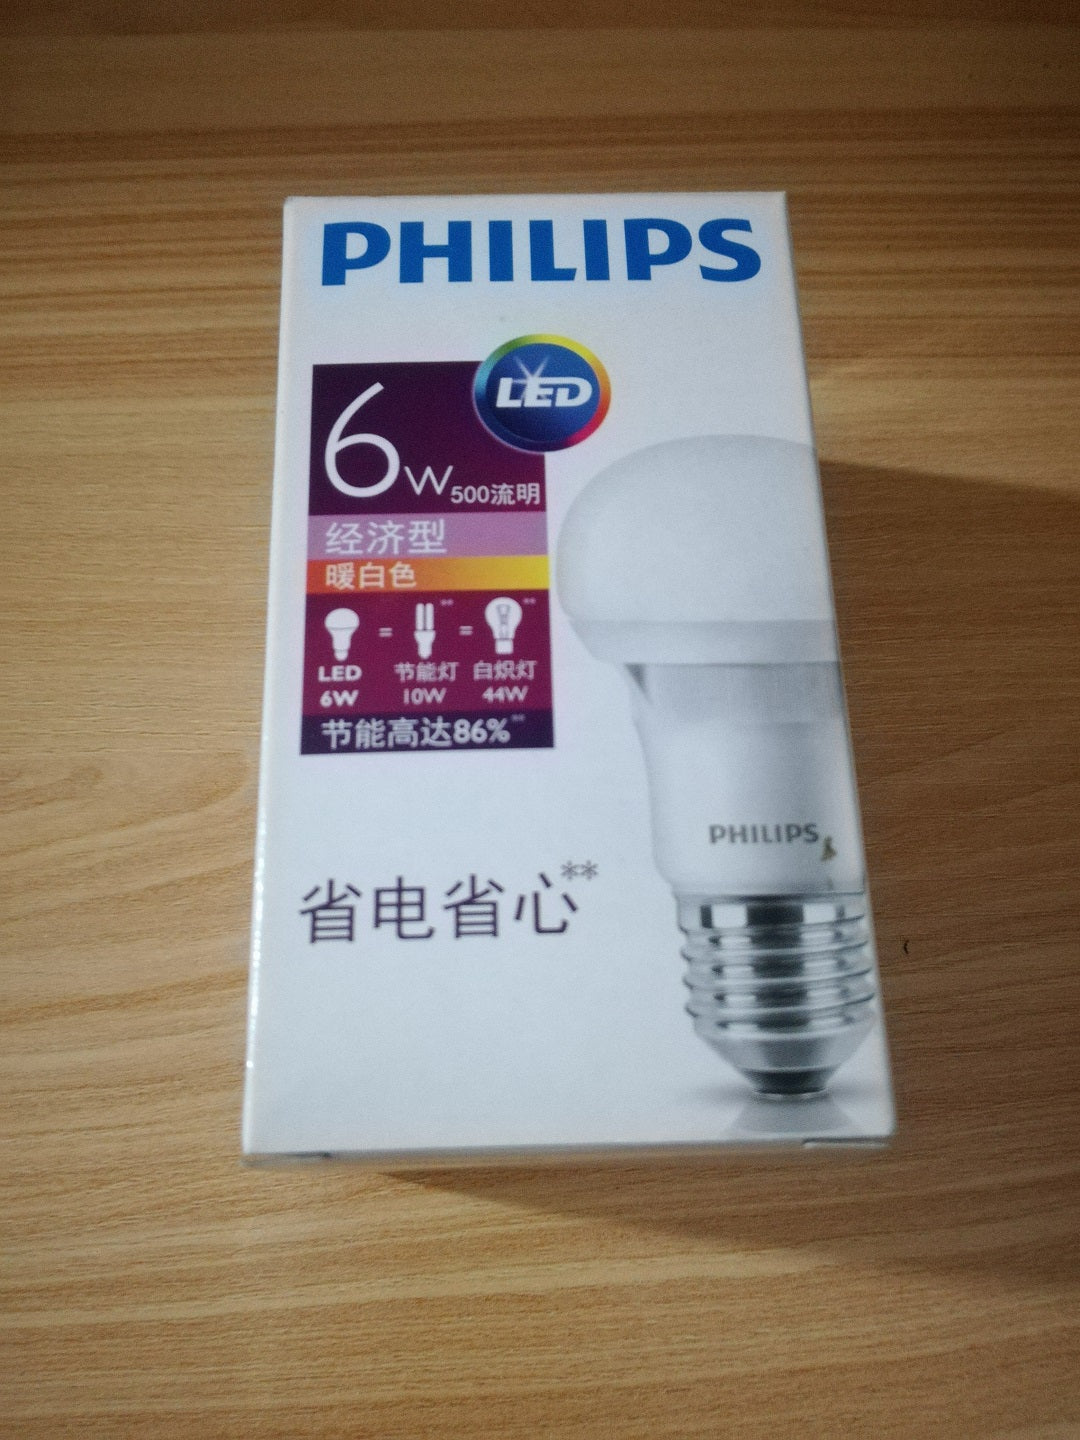 Gymnast Wedge At håndtere $2 Philips 6 W LED bulb Review – Battery Laboratory